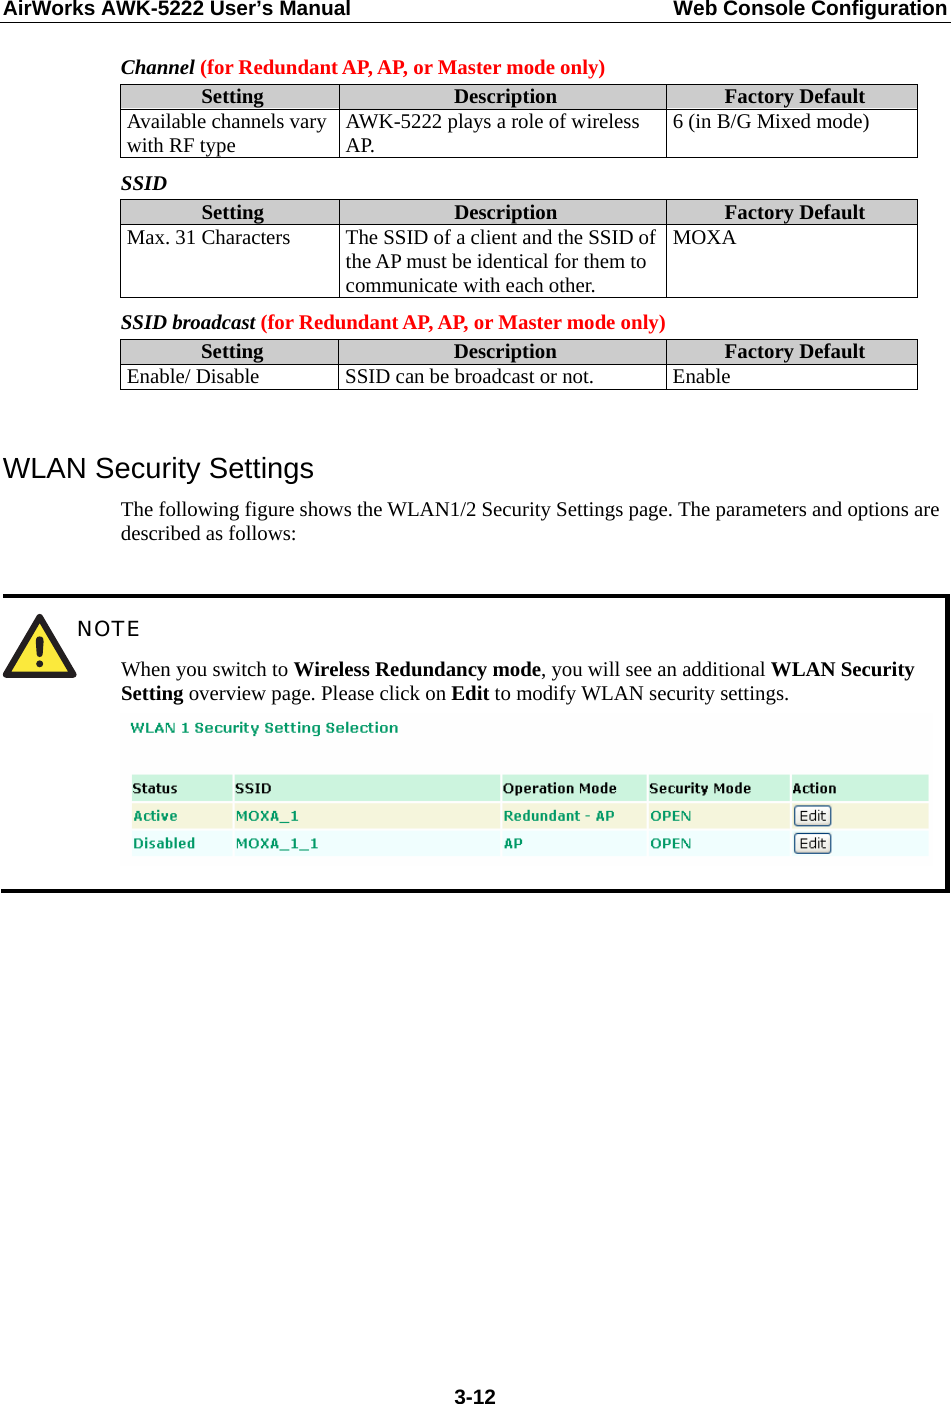 AirWorks AWK-5222 User’s Manual  Web Console Configuration  3-12Channel (for Redundant AP, AP, or Master mode only) Setting  Description  Factory Default Available channels vary with RF type  AWK-5222 plays a role of wireless AP.  6 (in B/G Mixed mode) SSID Setting  Description  Factory Default Max. 31 Characters The SSID of a client and the SSID of the AP must be identical for them to communicate with each other. MOXA SSID broadcast (for Redundant AP, AP, or Master mode only) Setting  Description  Factory Default Enable/ Disable  SSID can be broadcast or not.  Enable  WLAN Security Settings The following figure shows the WLAN1/2 Security Settings page. The parameters and options are described as follows:   NOTE When you switch to Wireless Redundancy mode, you will see an additional WLAN Security Setting overview page. Please click on Edit to modify WLAN security settings.              